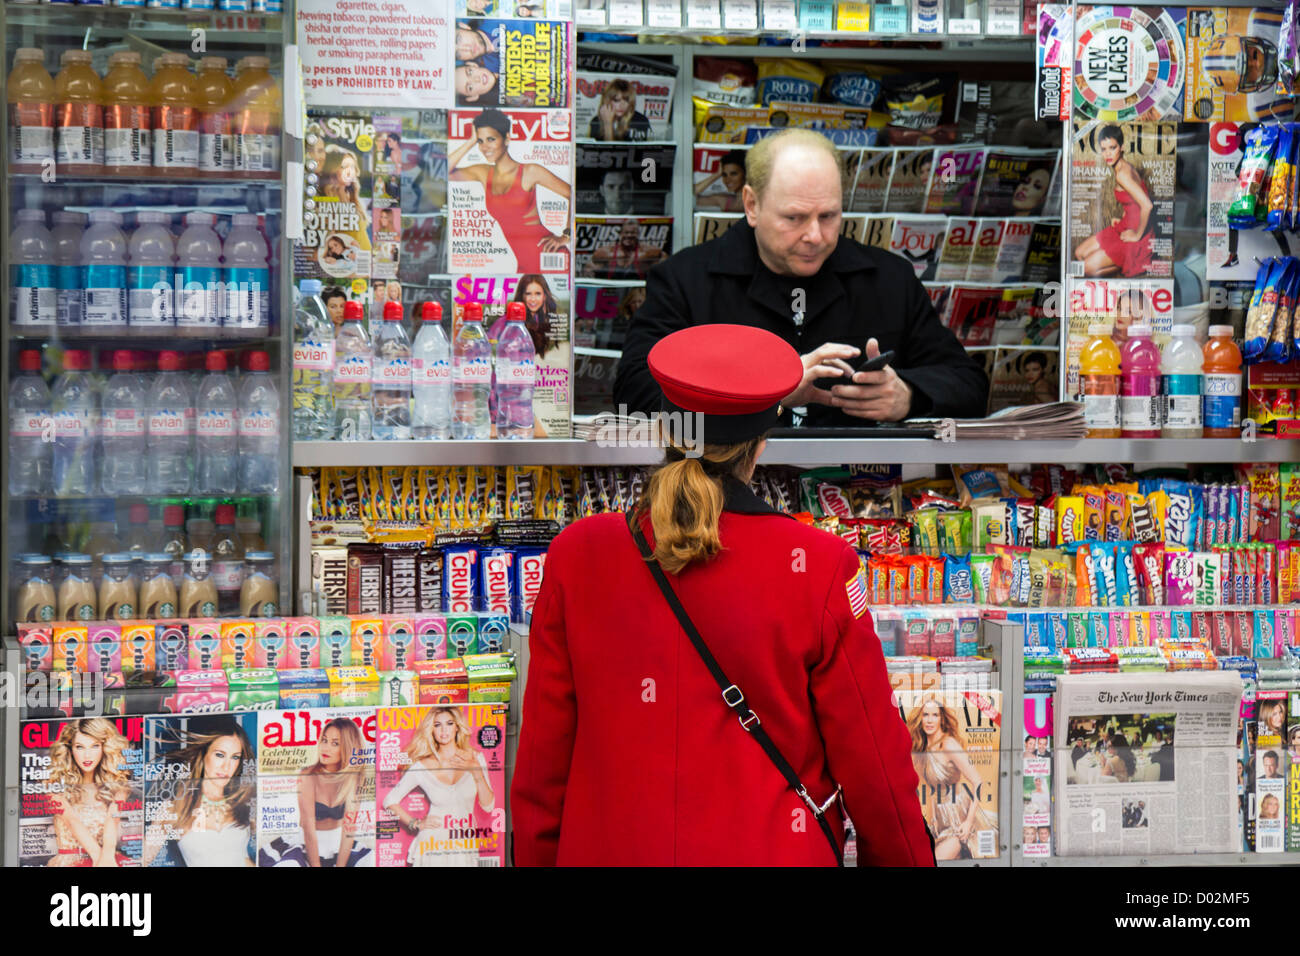 Woman in a red uniform in front of a newsstand seller in Wall Street, New York Stock Photo